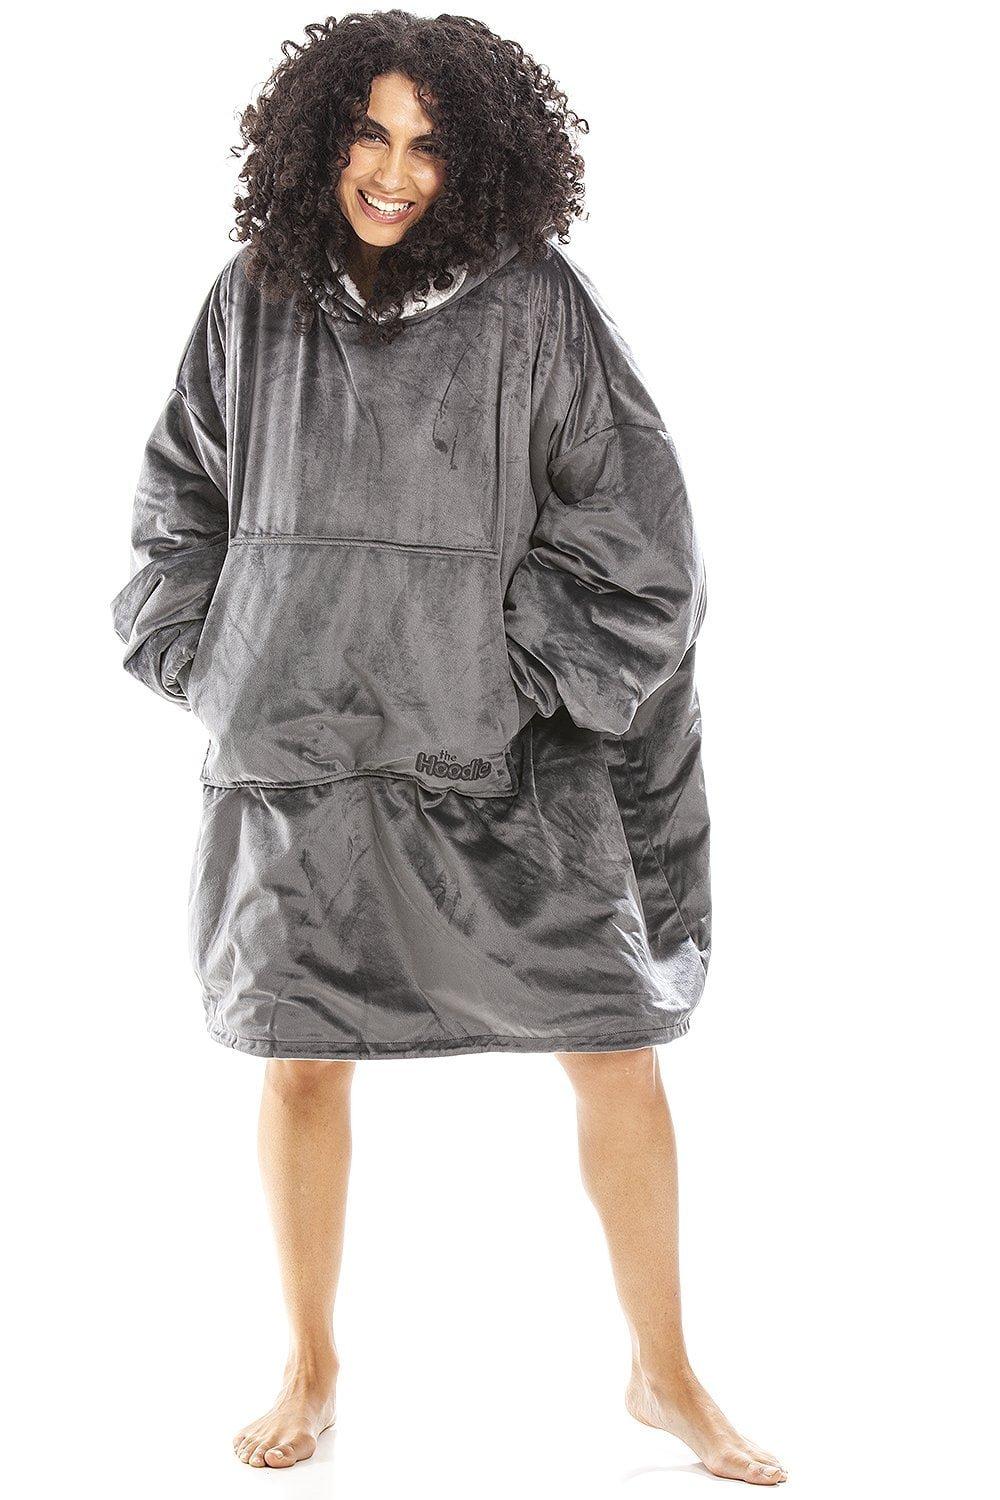 Supersoft Oversized Hoodie Heavy Weight Sherpa Fleece Wearable Hooded Blanket with Elasticated Cuffs & Giant Pocket